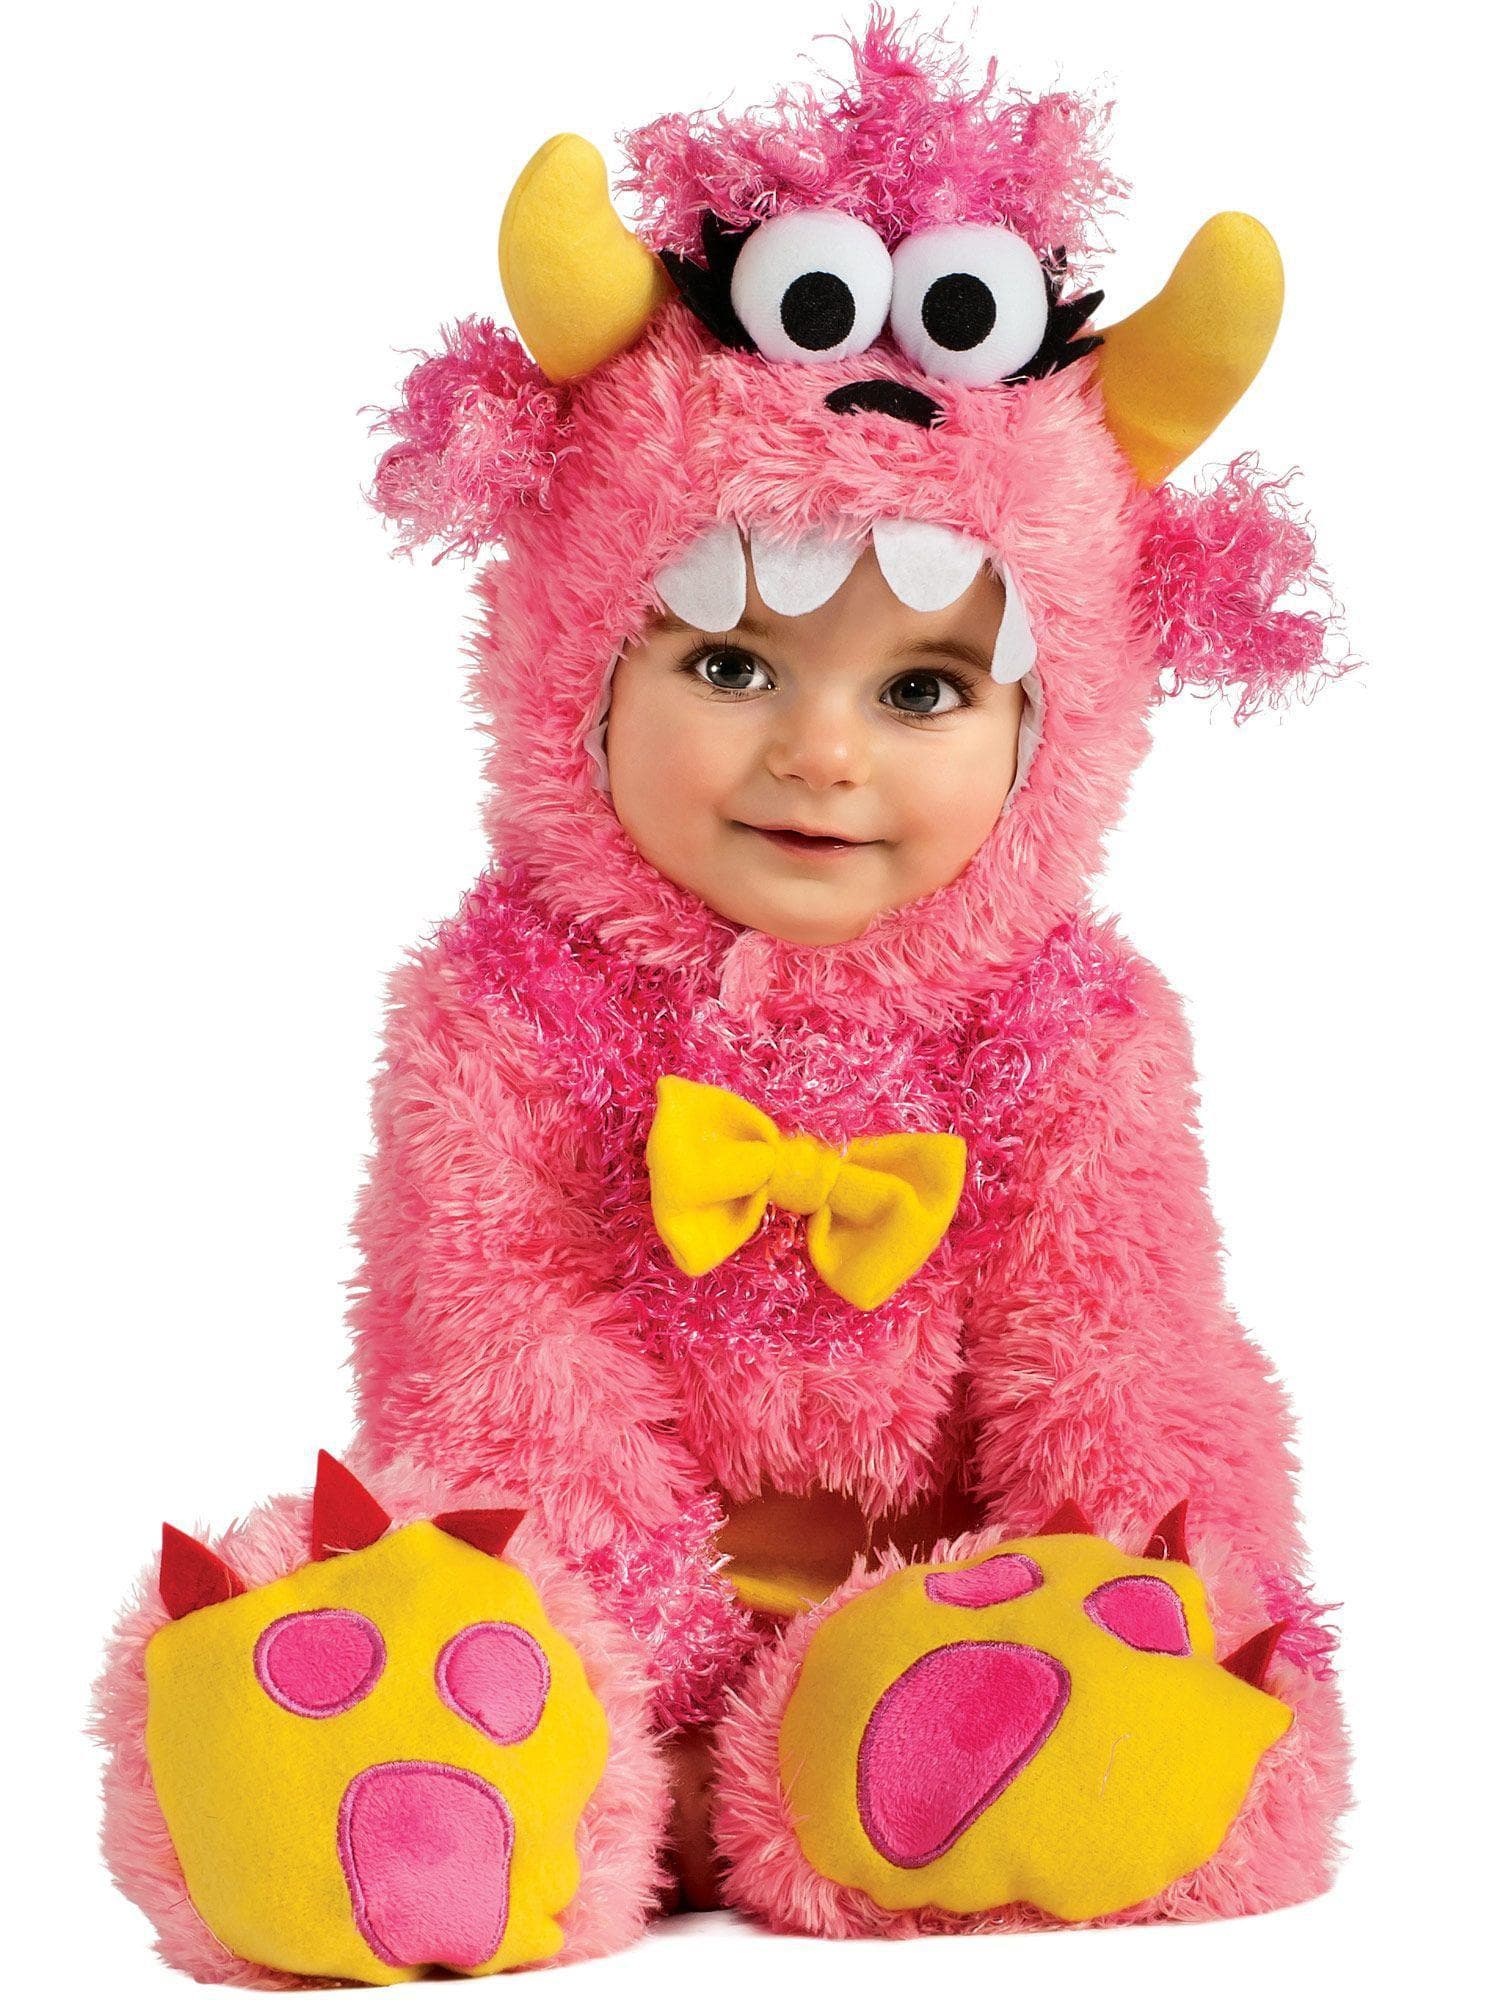 Baby/Toddler Pinky Winky Costume - costumes.com